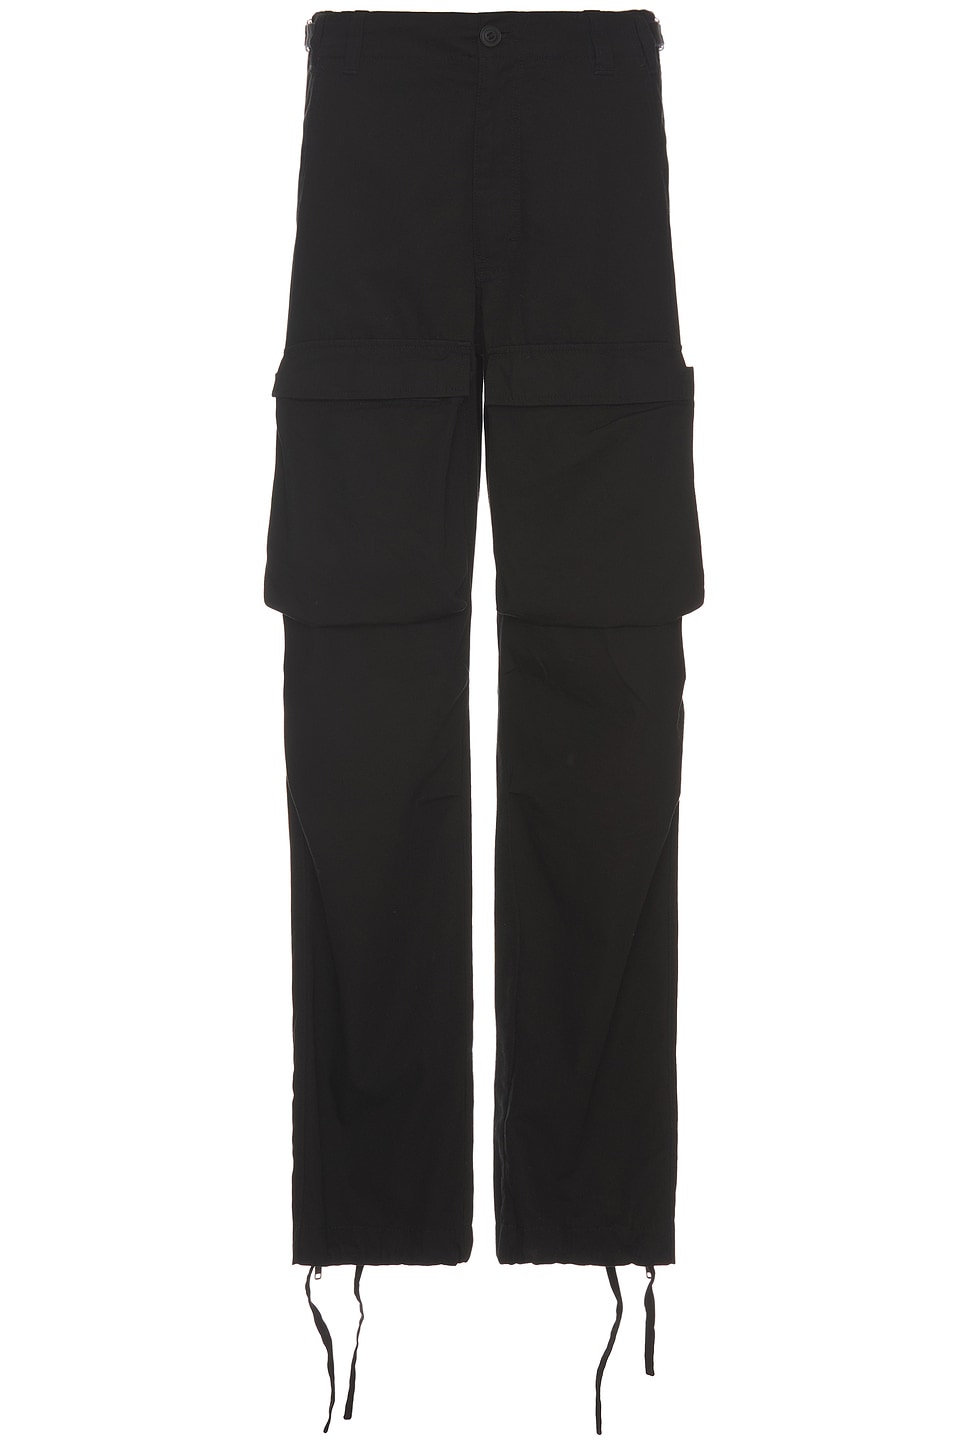 Image 1 of Givenchy Military Spirit Pant in Black